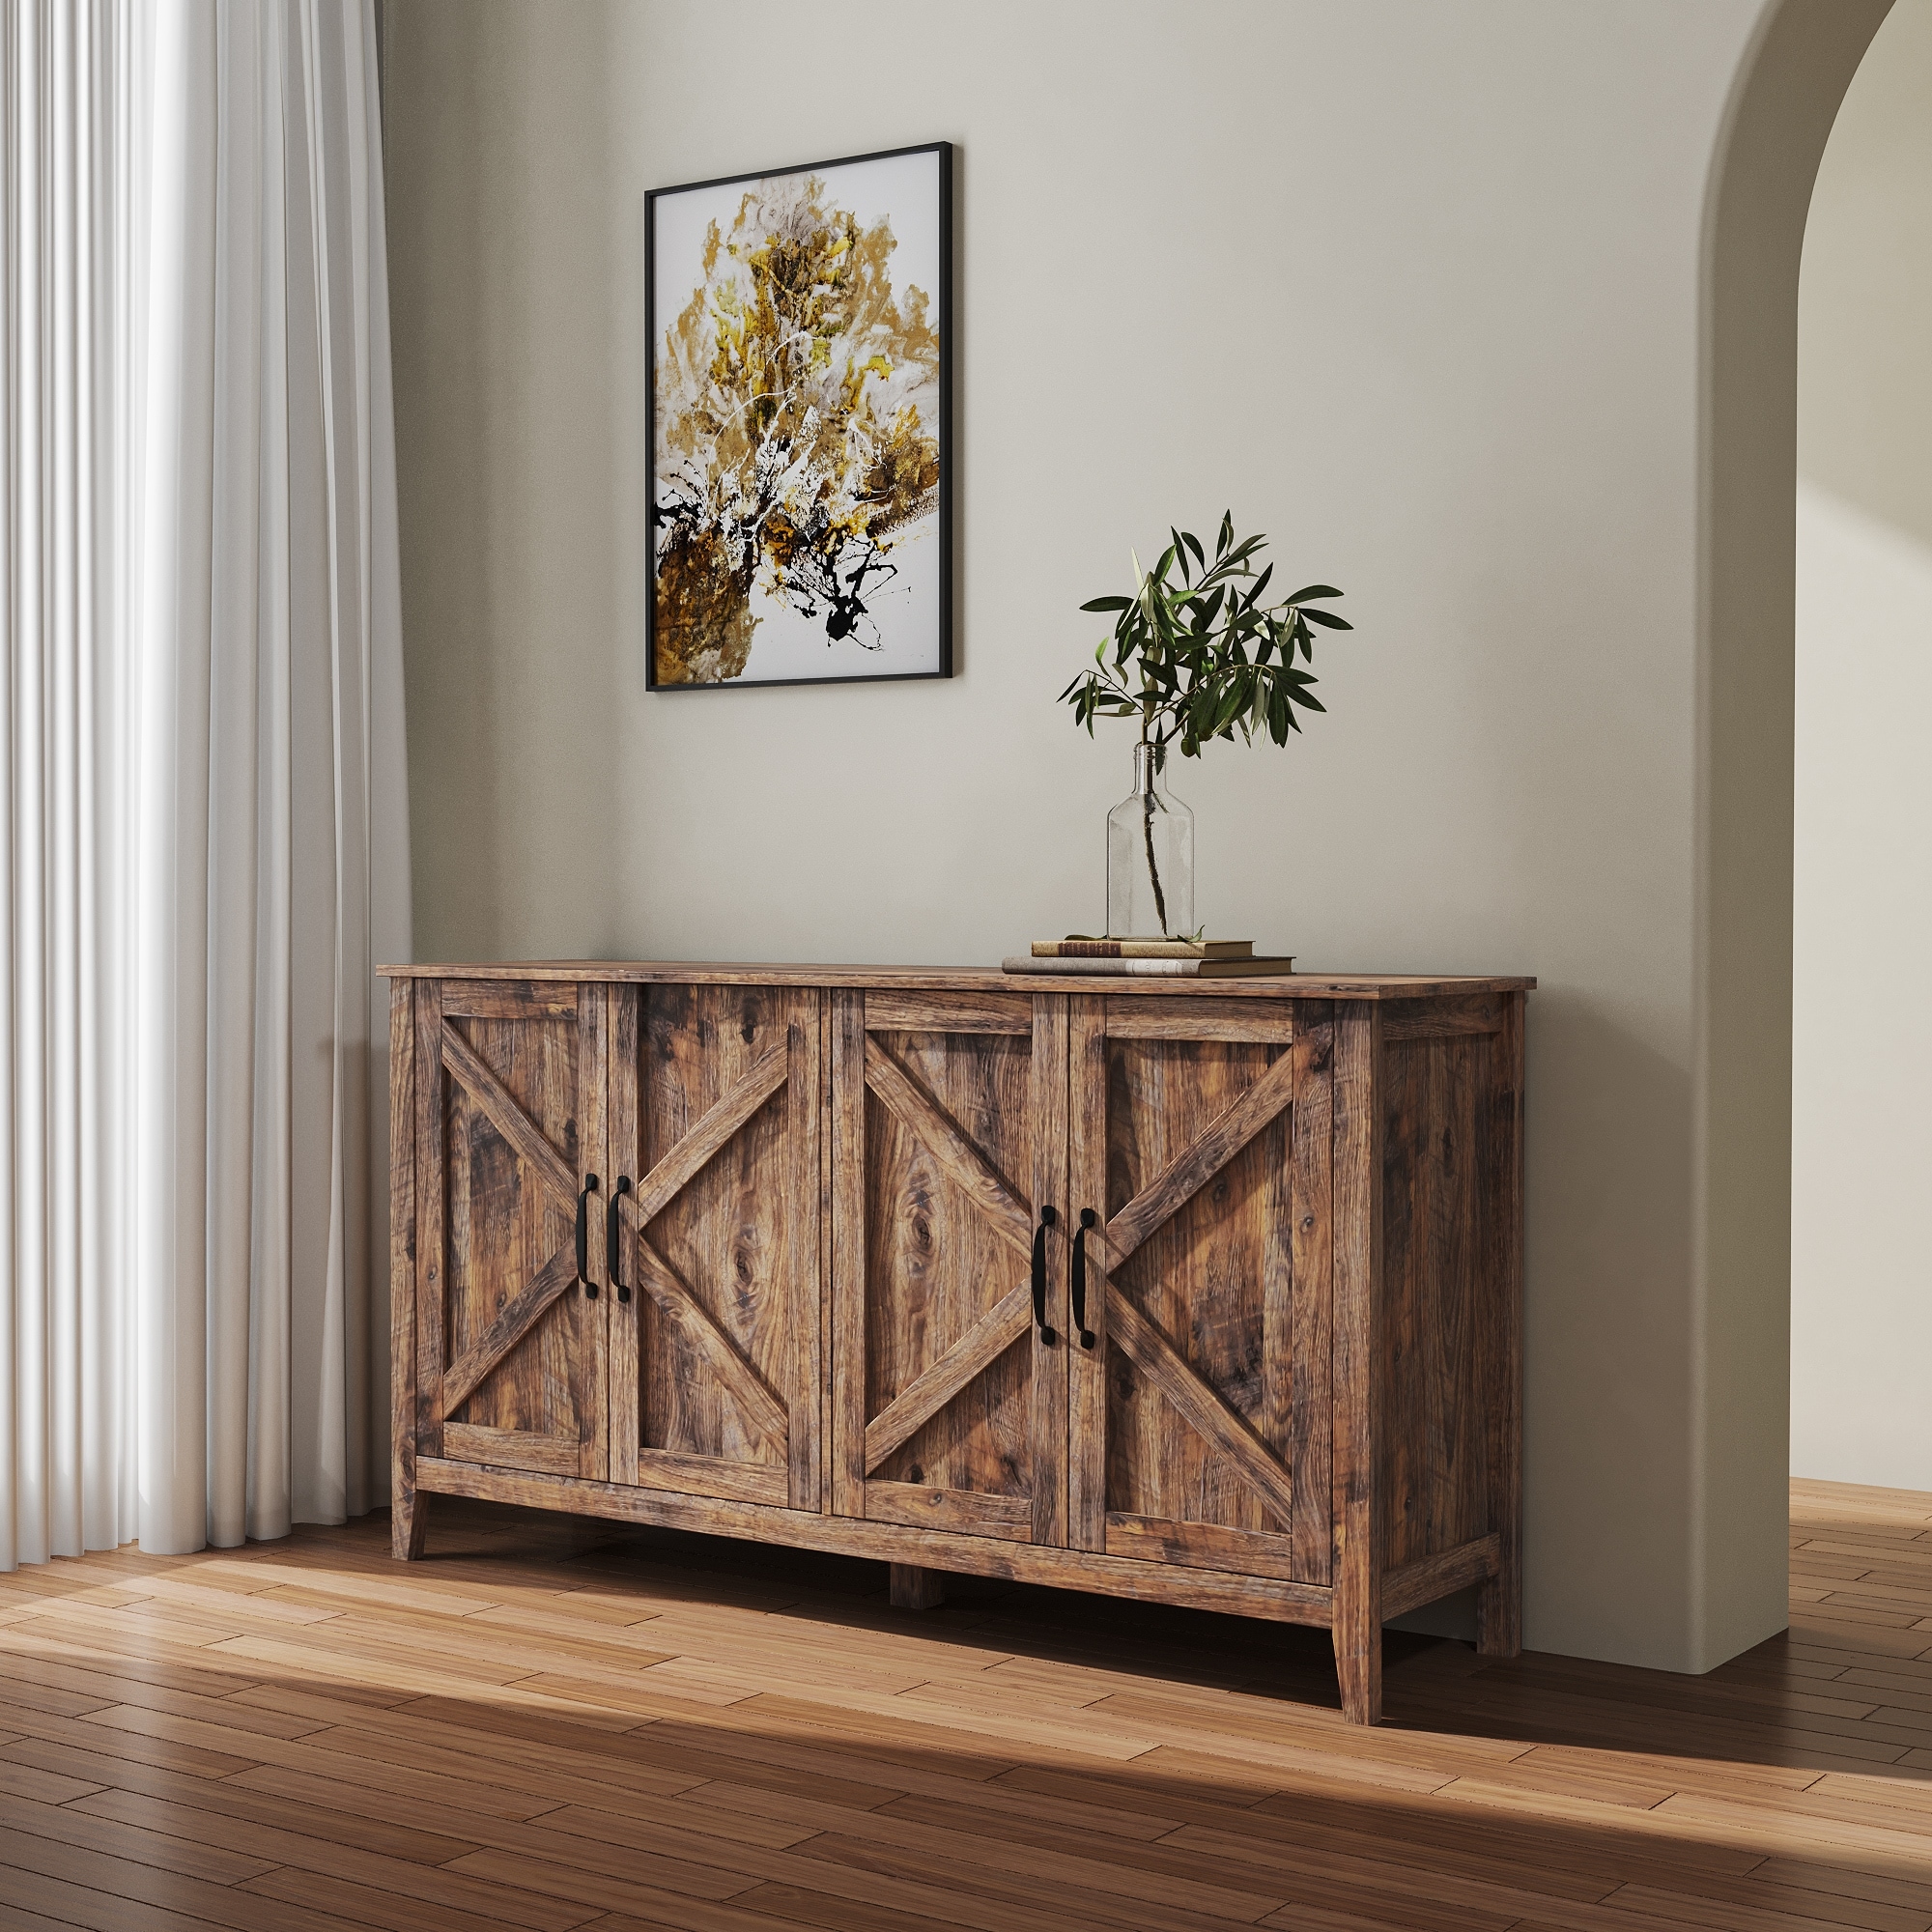 https://ak1.ostkcdn.com/images/products/is/images/direct/ed692a1f30085f42da21ac300a922ab928a216e1/Sideboard-Storage-Entryway-Floor-Cabinet-with-4-Shelves.jpg